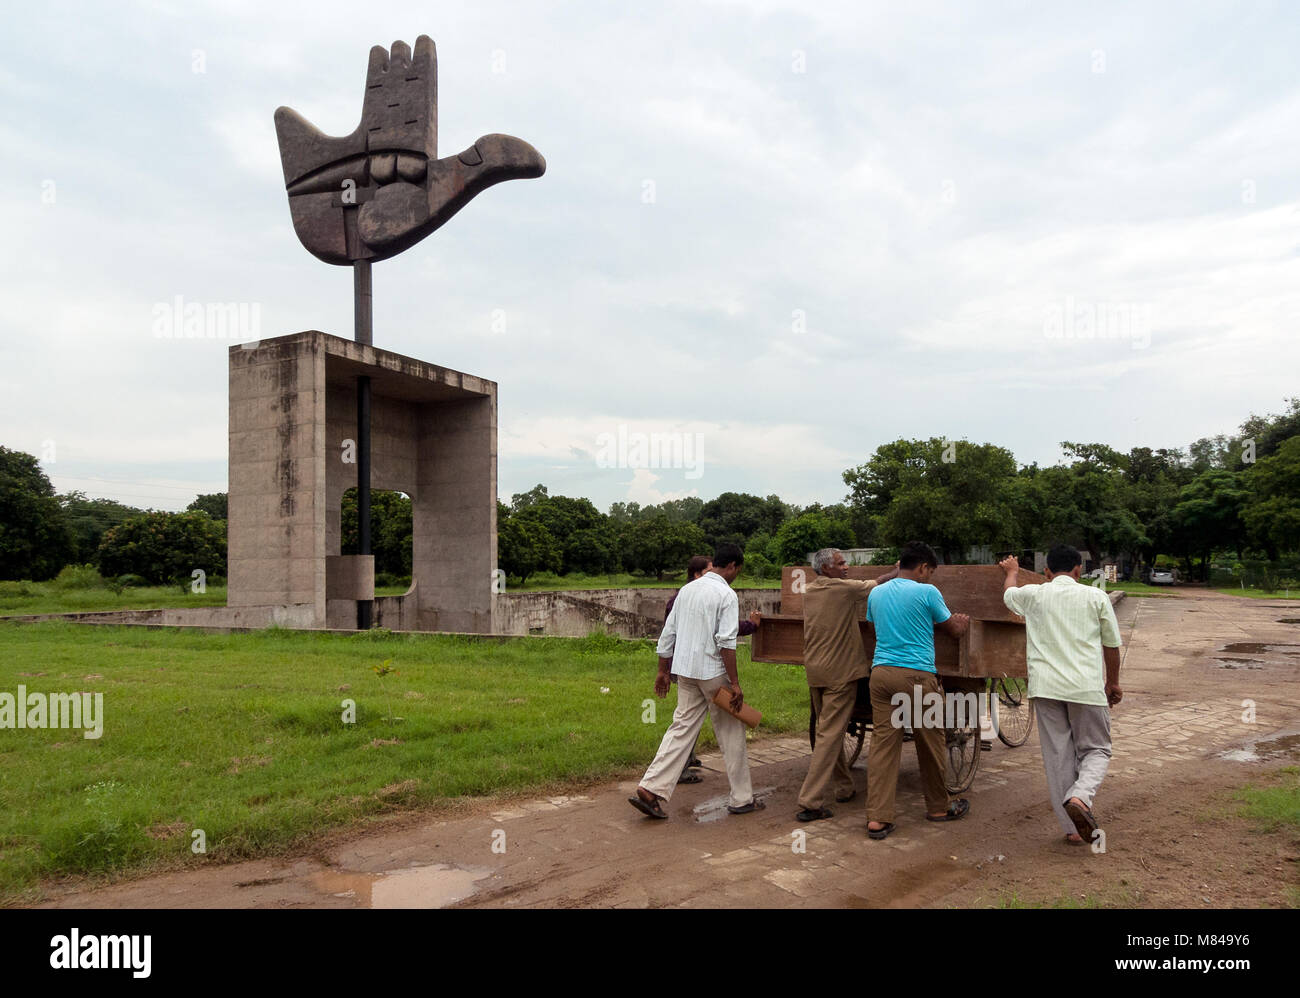 Chandigarh, India: Open Hand Monument is a symbolic structure designed by the architect Le Corbusier and located in the Capitol Complex Stock Photo